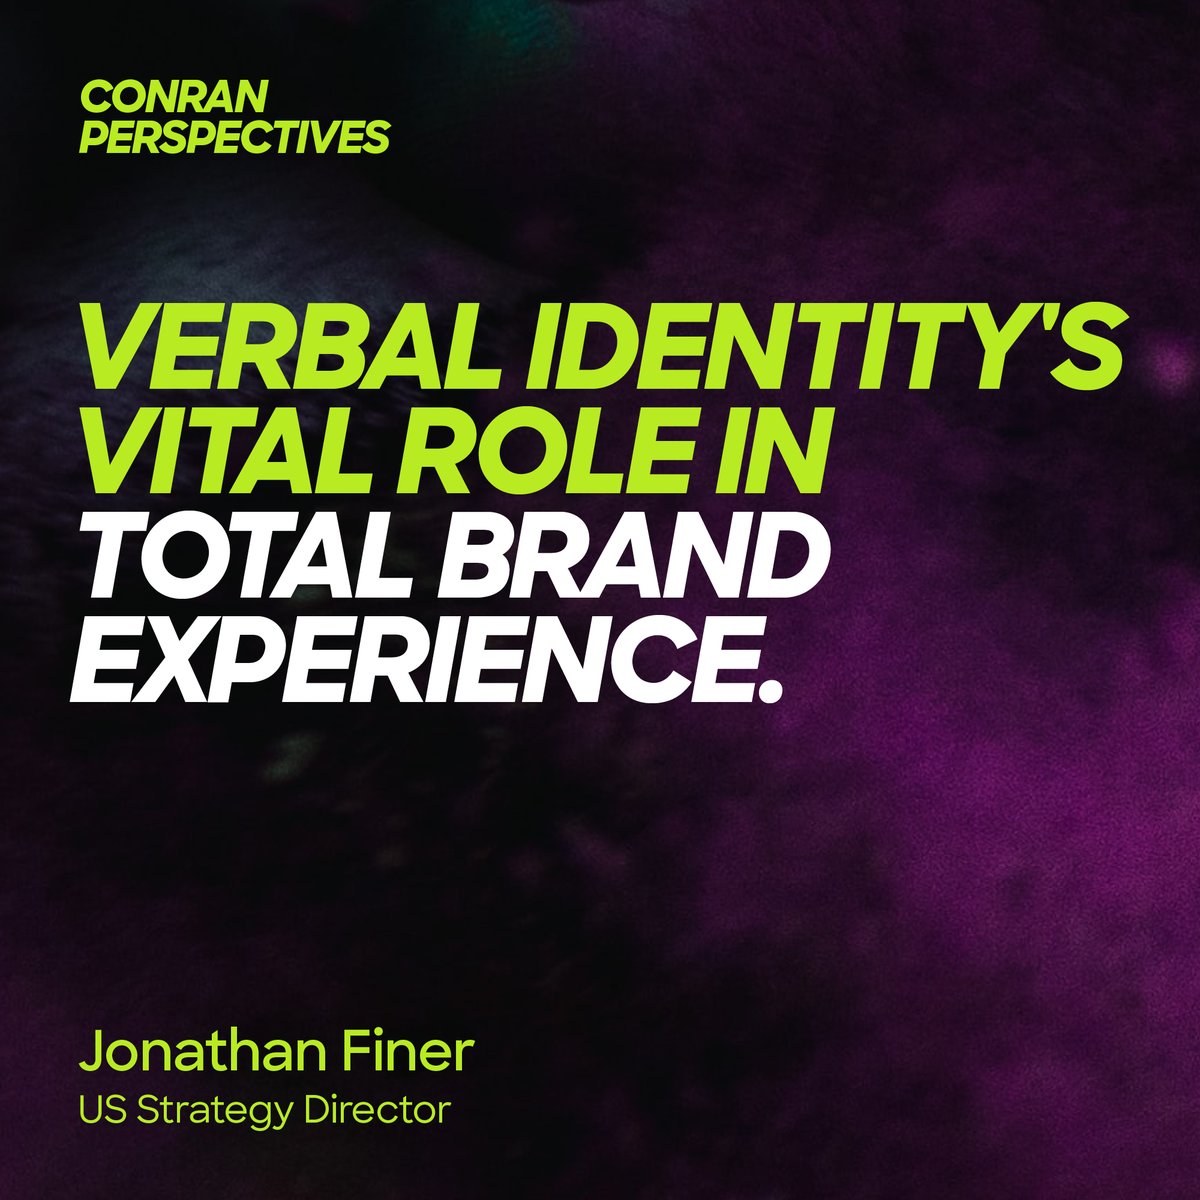 US Strategy Director Jonathan Finer explores the multifaceted nature of verbal identity – and its crucial role in shaping brand perception. Read the full article here: bit.ly/4ani6V8 #verbalidentity #brandexperience #branding